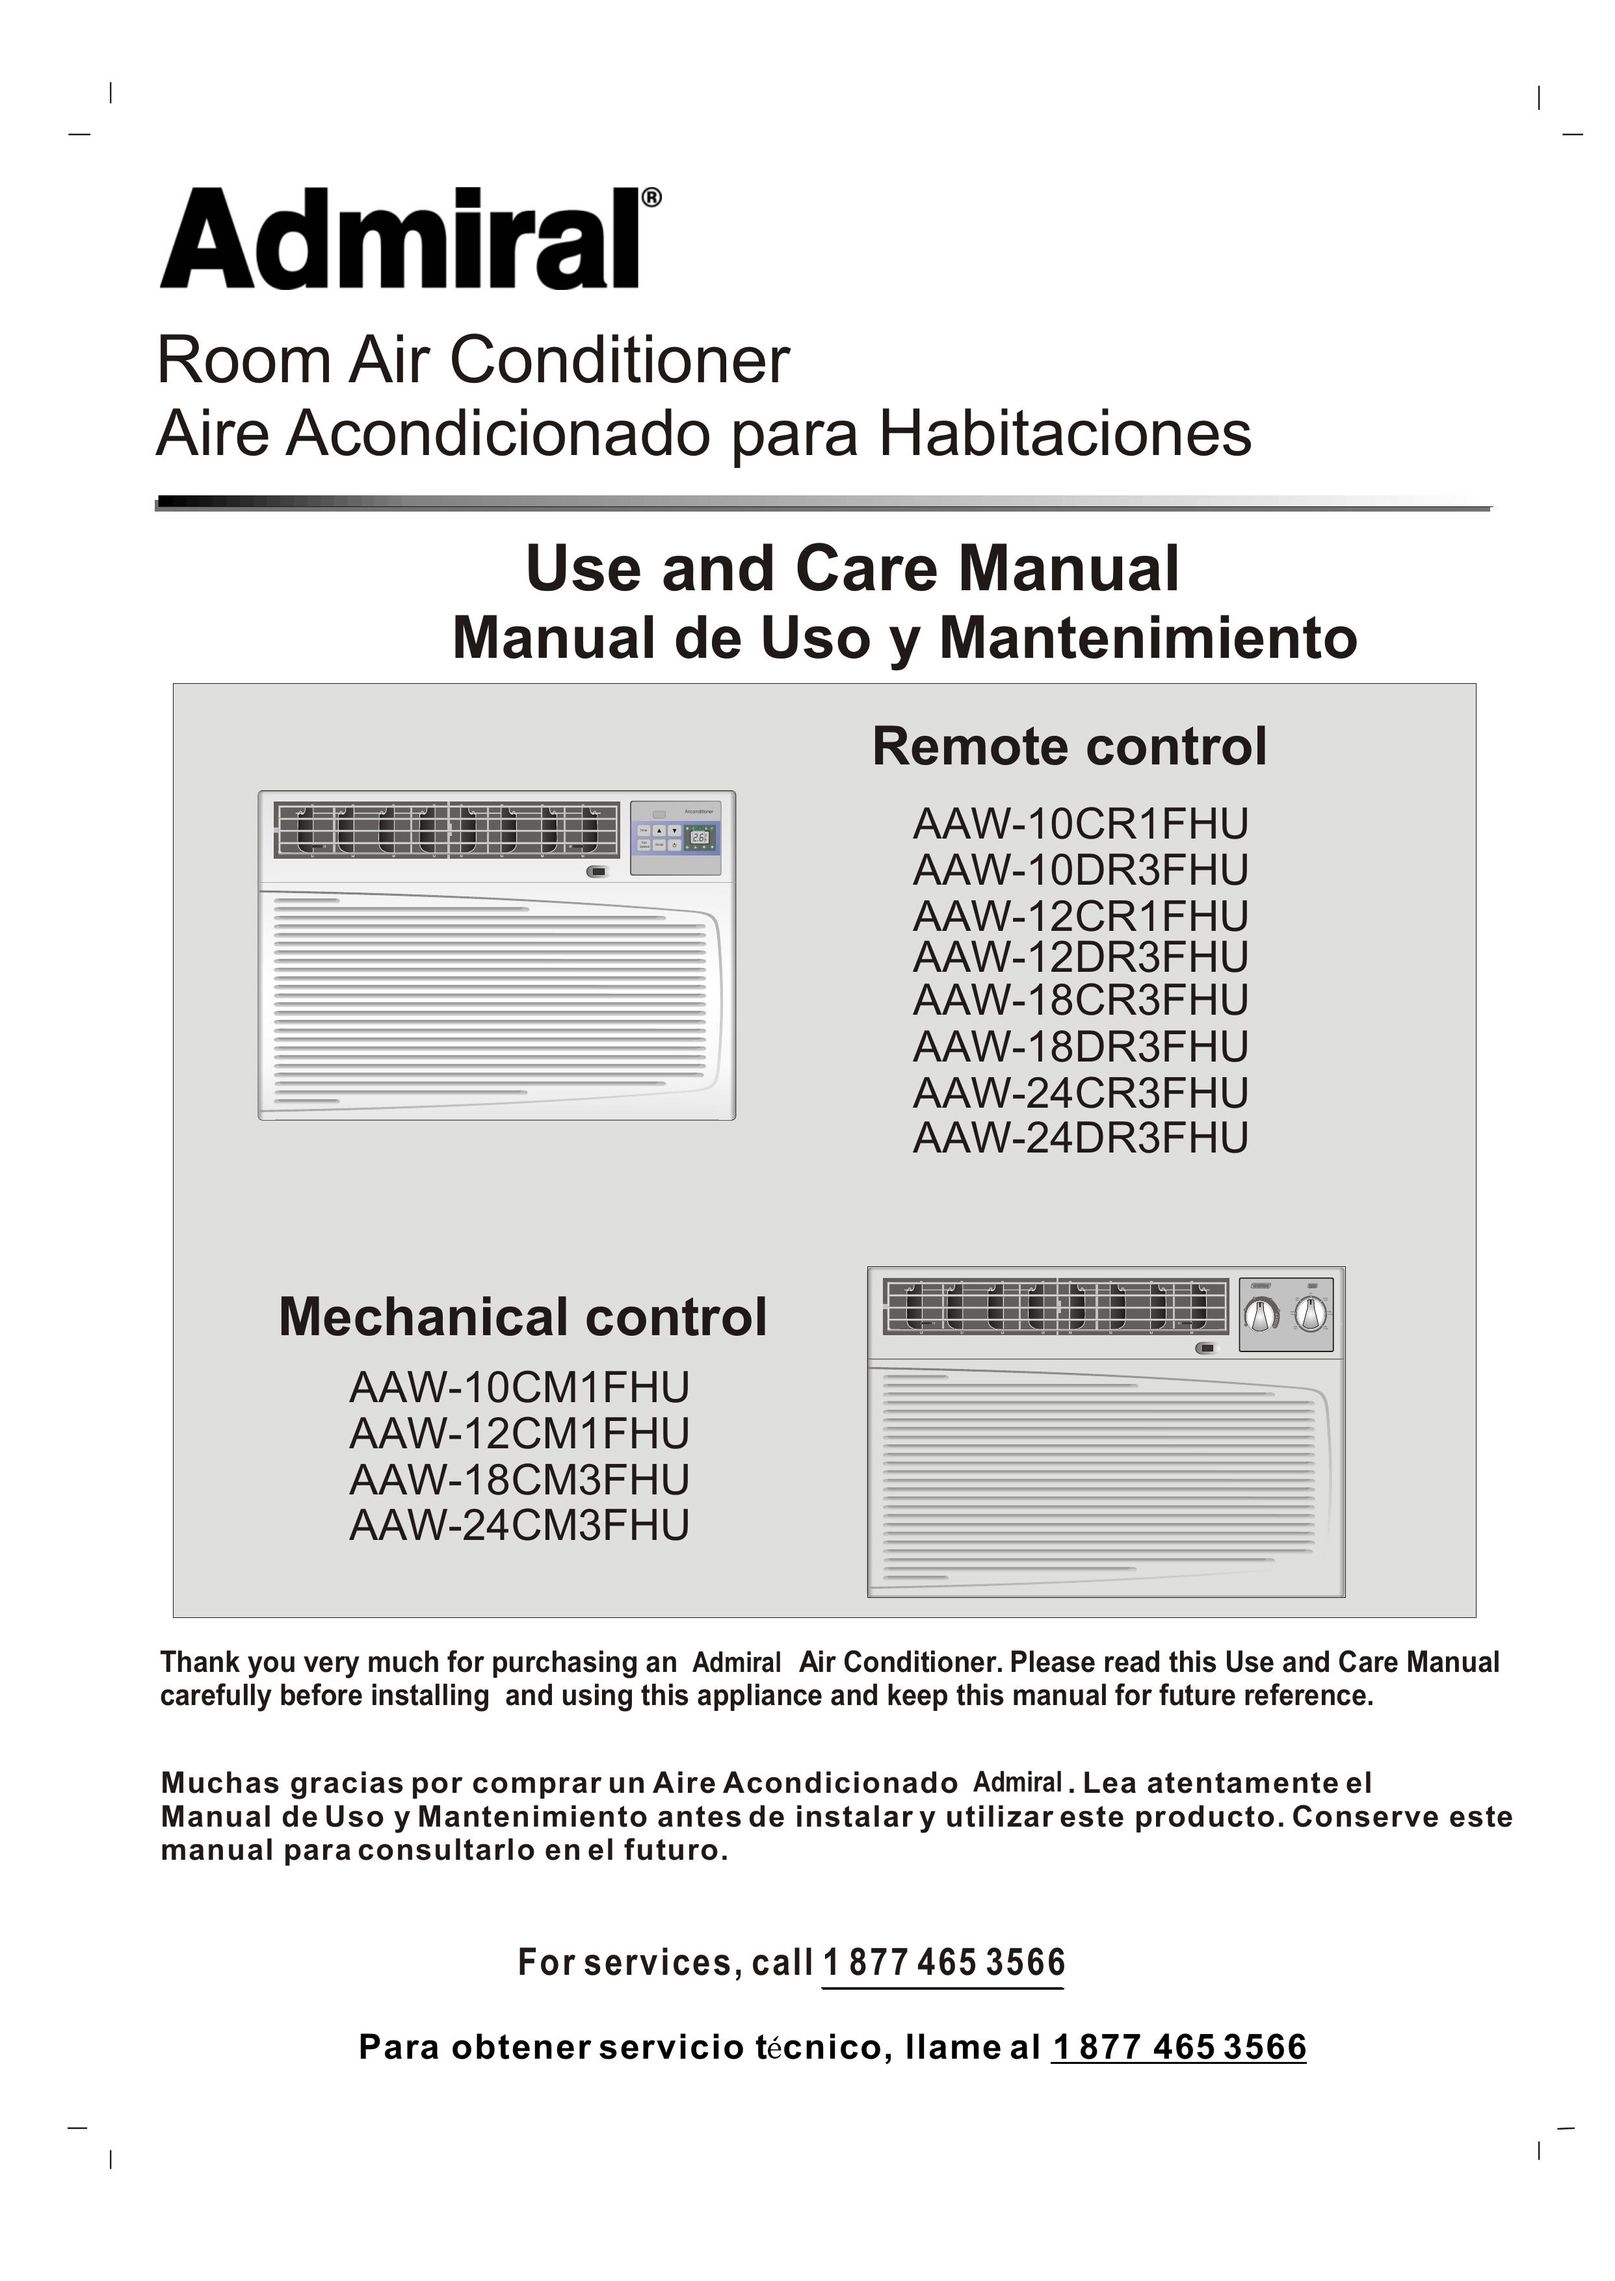 Admiral AAW-24CR3FHU Air Conditioner User Manual (Page 1)